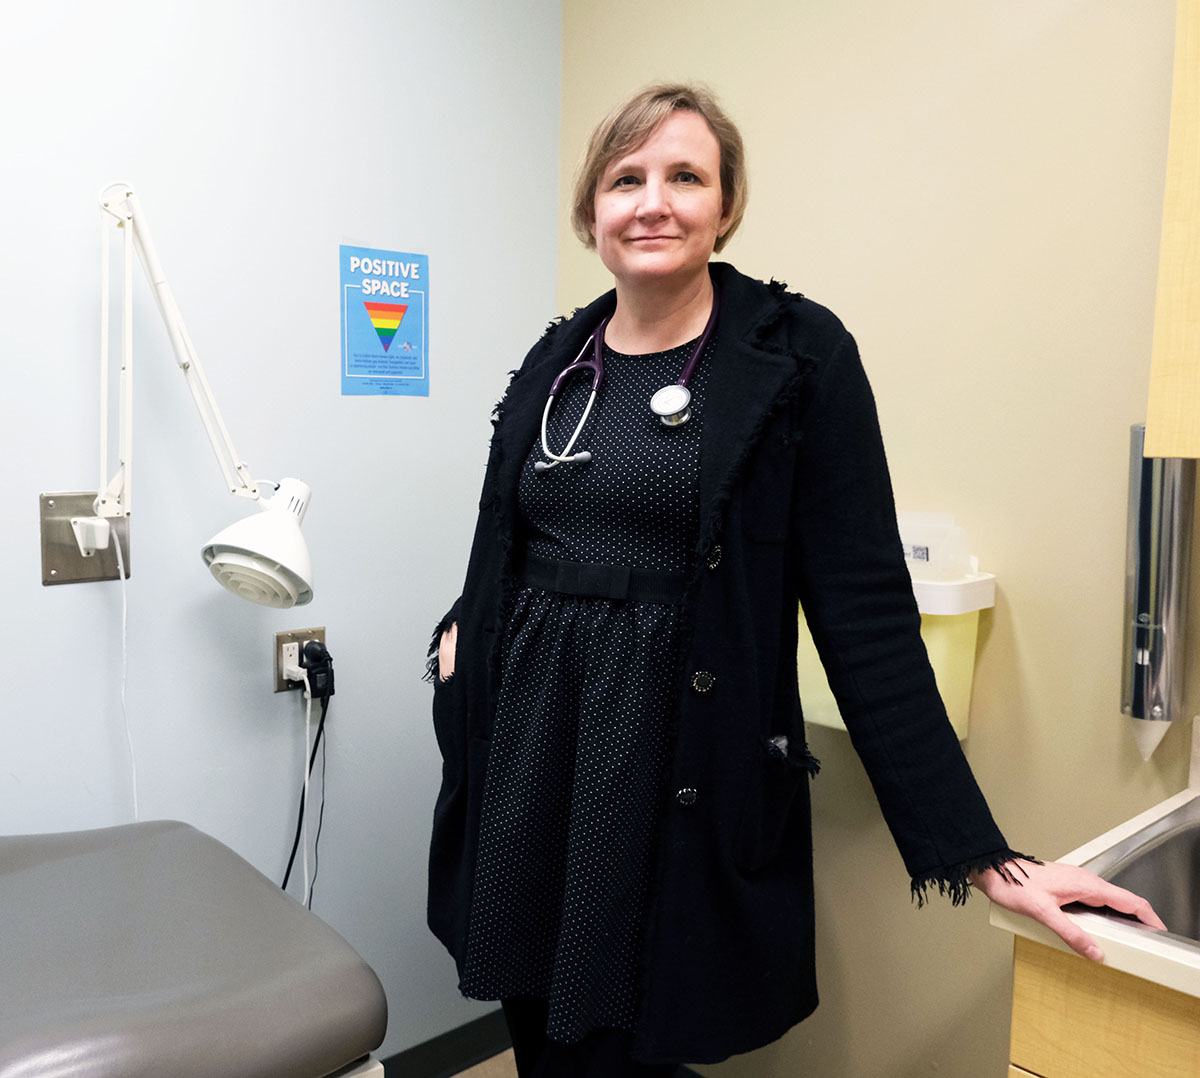 Dr. Ginger Ruddy (MD) is a family physician at West Winds Primary Health Centre and assistant professor in the Department of Academic Family Medicine at USask College of Medicine. (Photo: Jana Al-Sagheer)